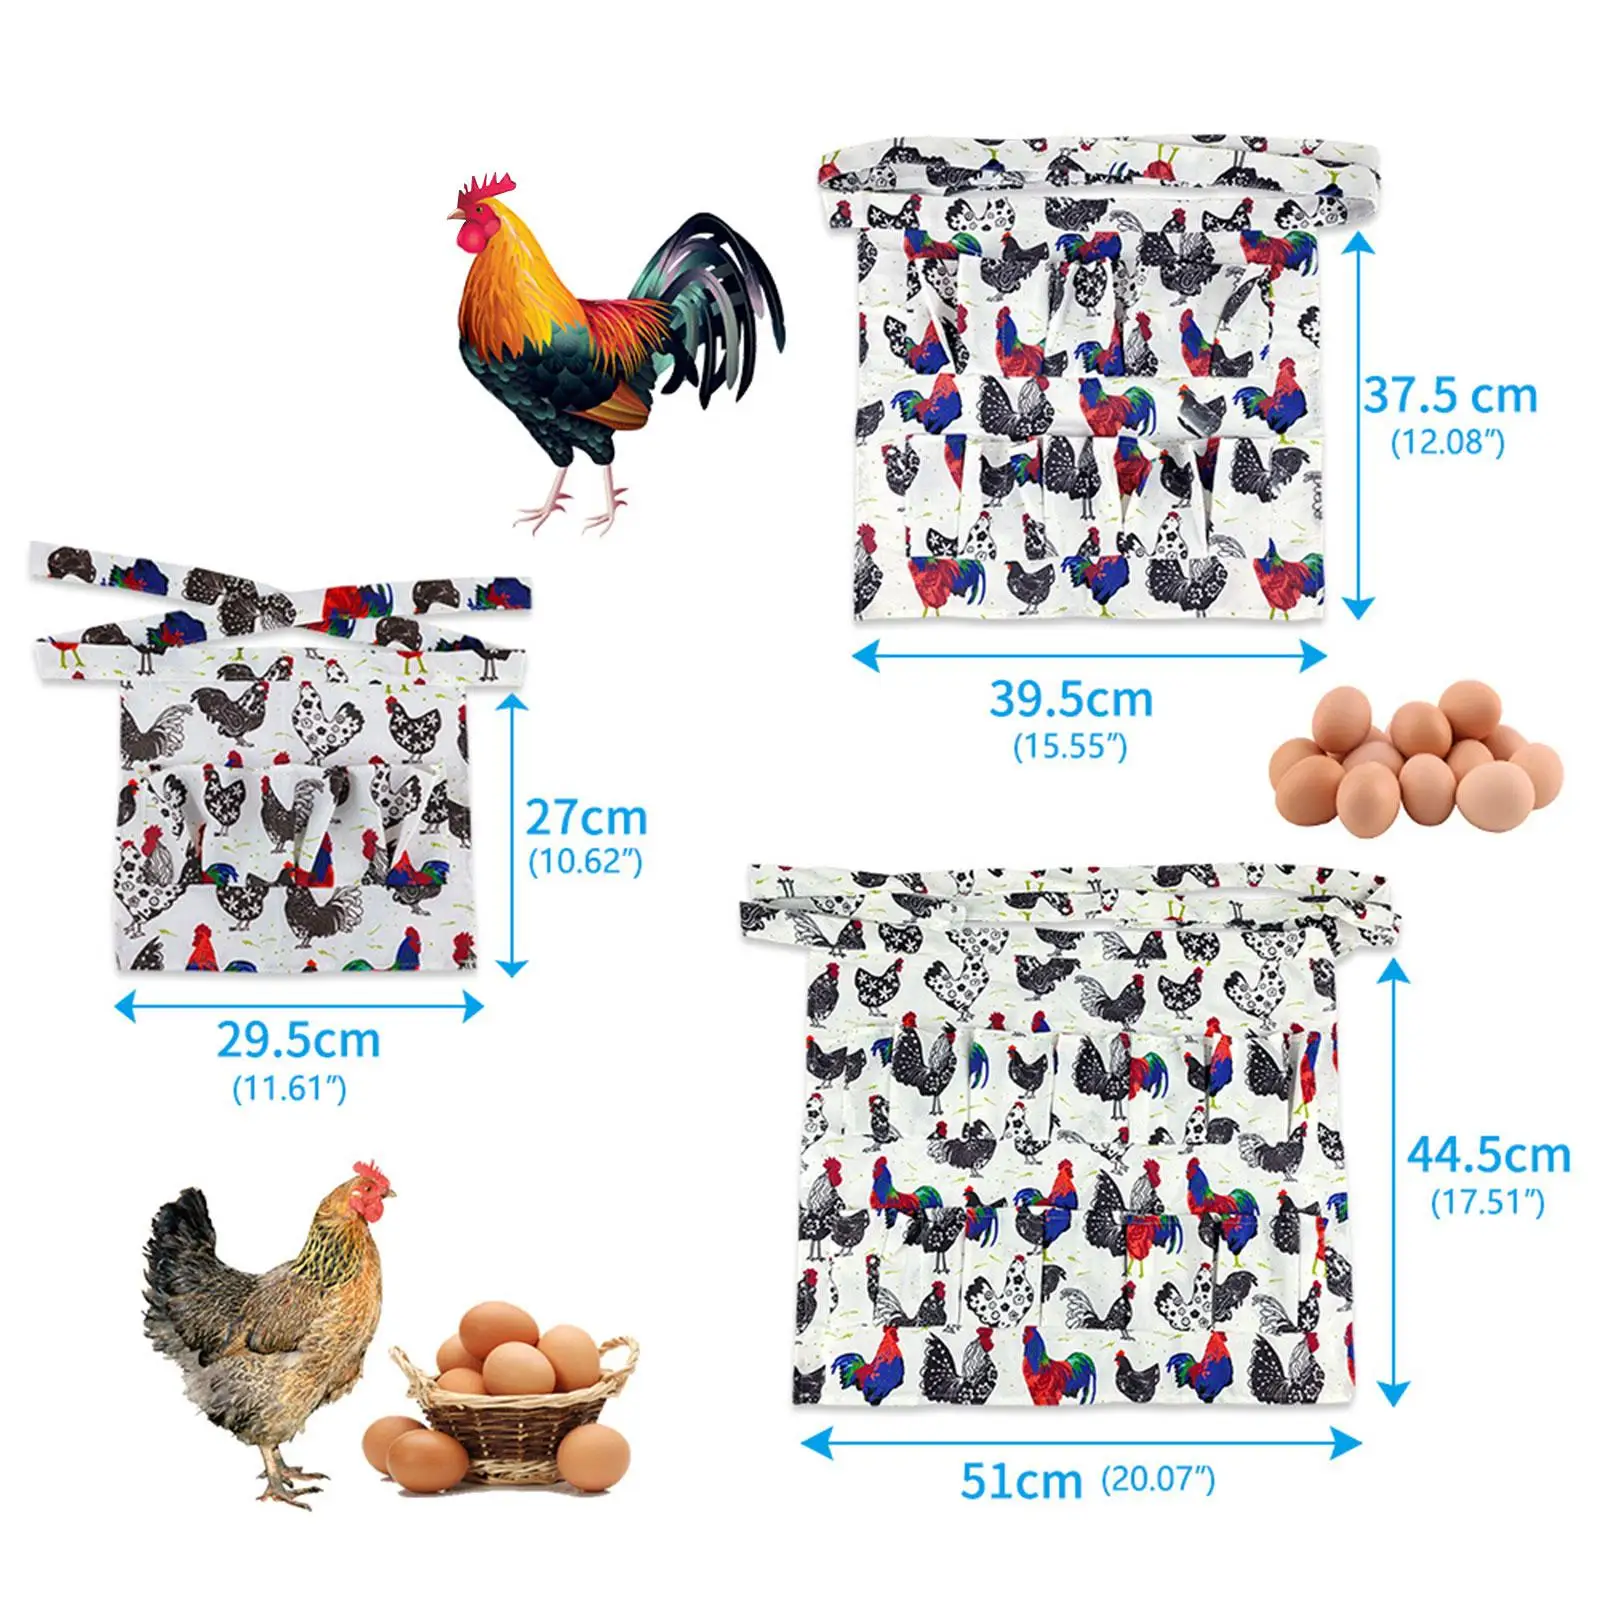 Eggs Collecting Apron Gathering Egg Carrier with Pockets Holding Fresh Eggs Holder for Garden Farmhouse Gardening Adults Outdoor